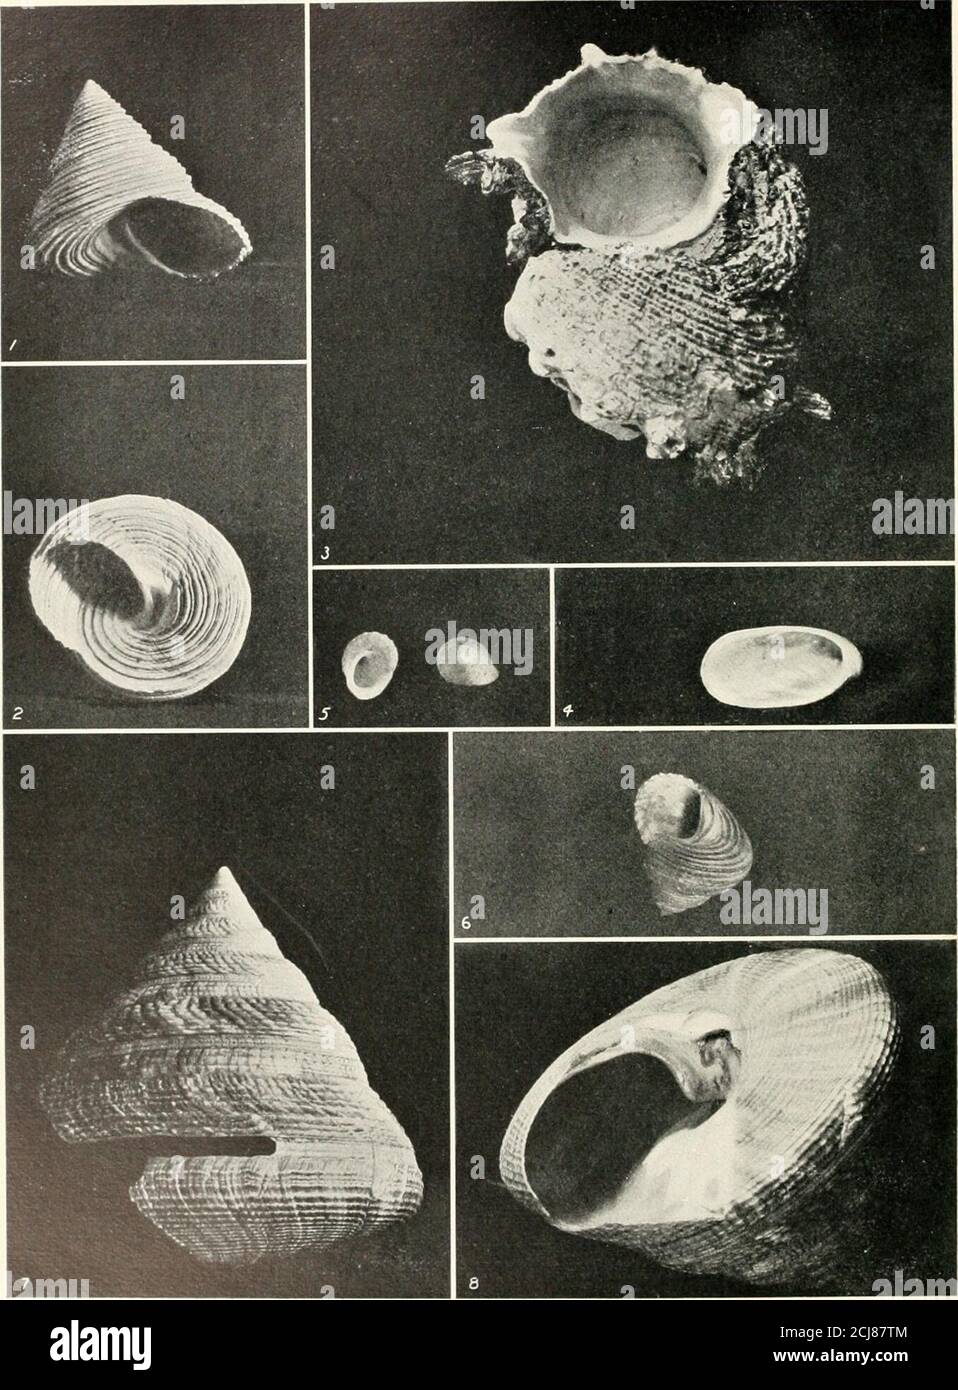 . The shell book . 1 Livona pica. 2 Chlorostoma pdlis-serpent is. 3 Chlorostoma brunnea. Photograph by Maxwell Smith. TOP SHELLS 4 Norrisia Norrisii. 5 Calliostoma ttgris. 6 Rotclla gigantca. 7 TrochttsNtloticus (much reduced). 8 Chlorostoma jitnebrale. 9 Calliostoma anmttata.10 Rocks at La Jolla, Cal.. TOP SHELLS AND OTHERS 1,2 Channelled Top Shell, Calliostoma cunalieulatiim. 5 Little Top Shell, Trochalclla pitlchella. ,1 h-.lphin Shell, I&gt;ltinttl&lt;i laeiniata. 6 Ridged Top Shell, Callwstoma costatum. 4 Wide-mouthed Snail, GY/id planulata. 7, 8 Slit Shell, Plewotomarta Bcyrichi. The Top Stock Photo